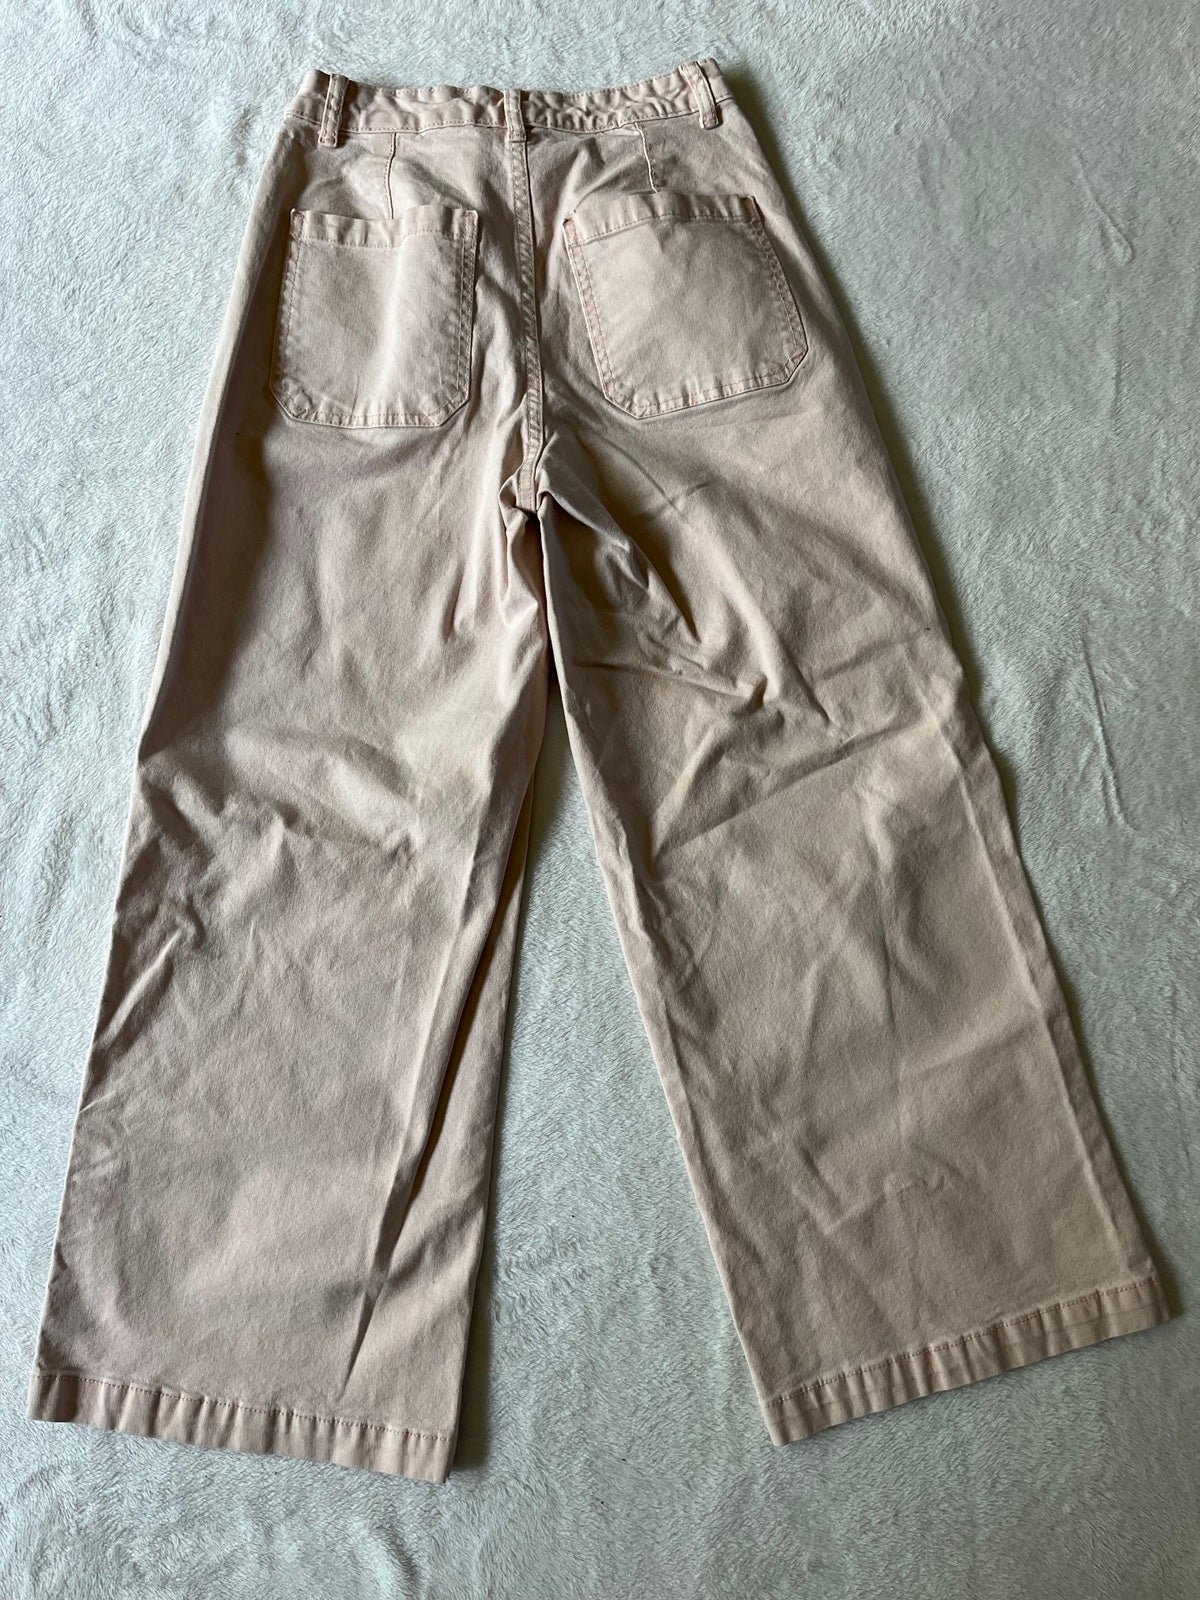 Custom Wide leg Pants pDLOhr5Bd Everyday Low Prices